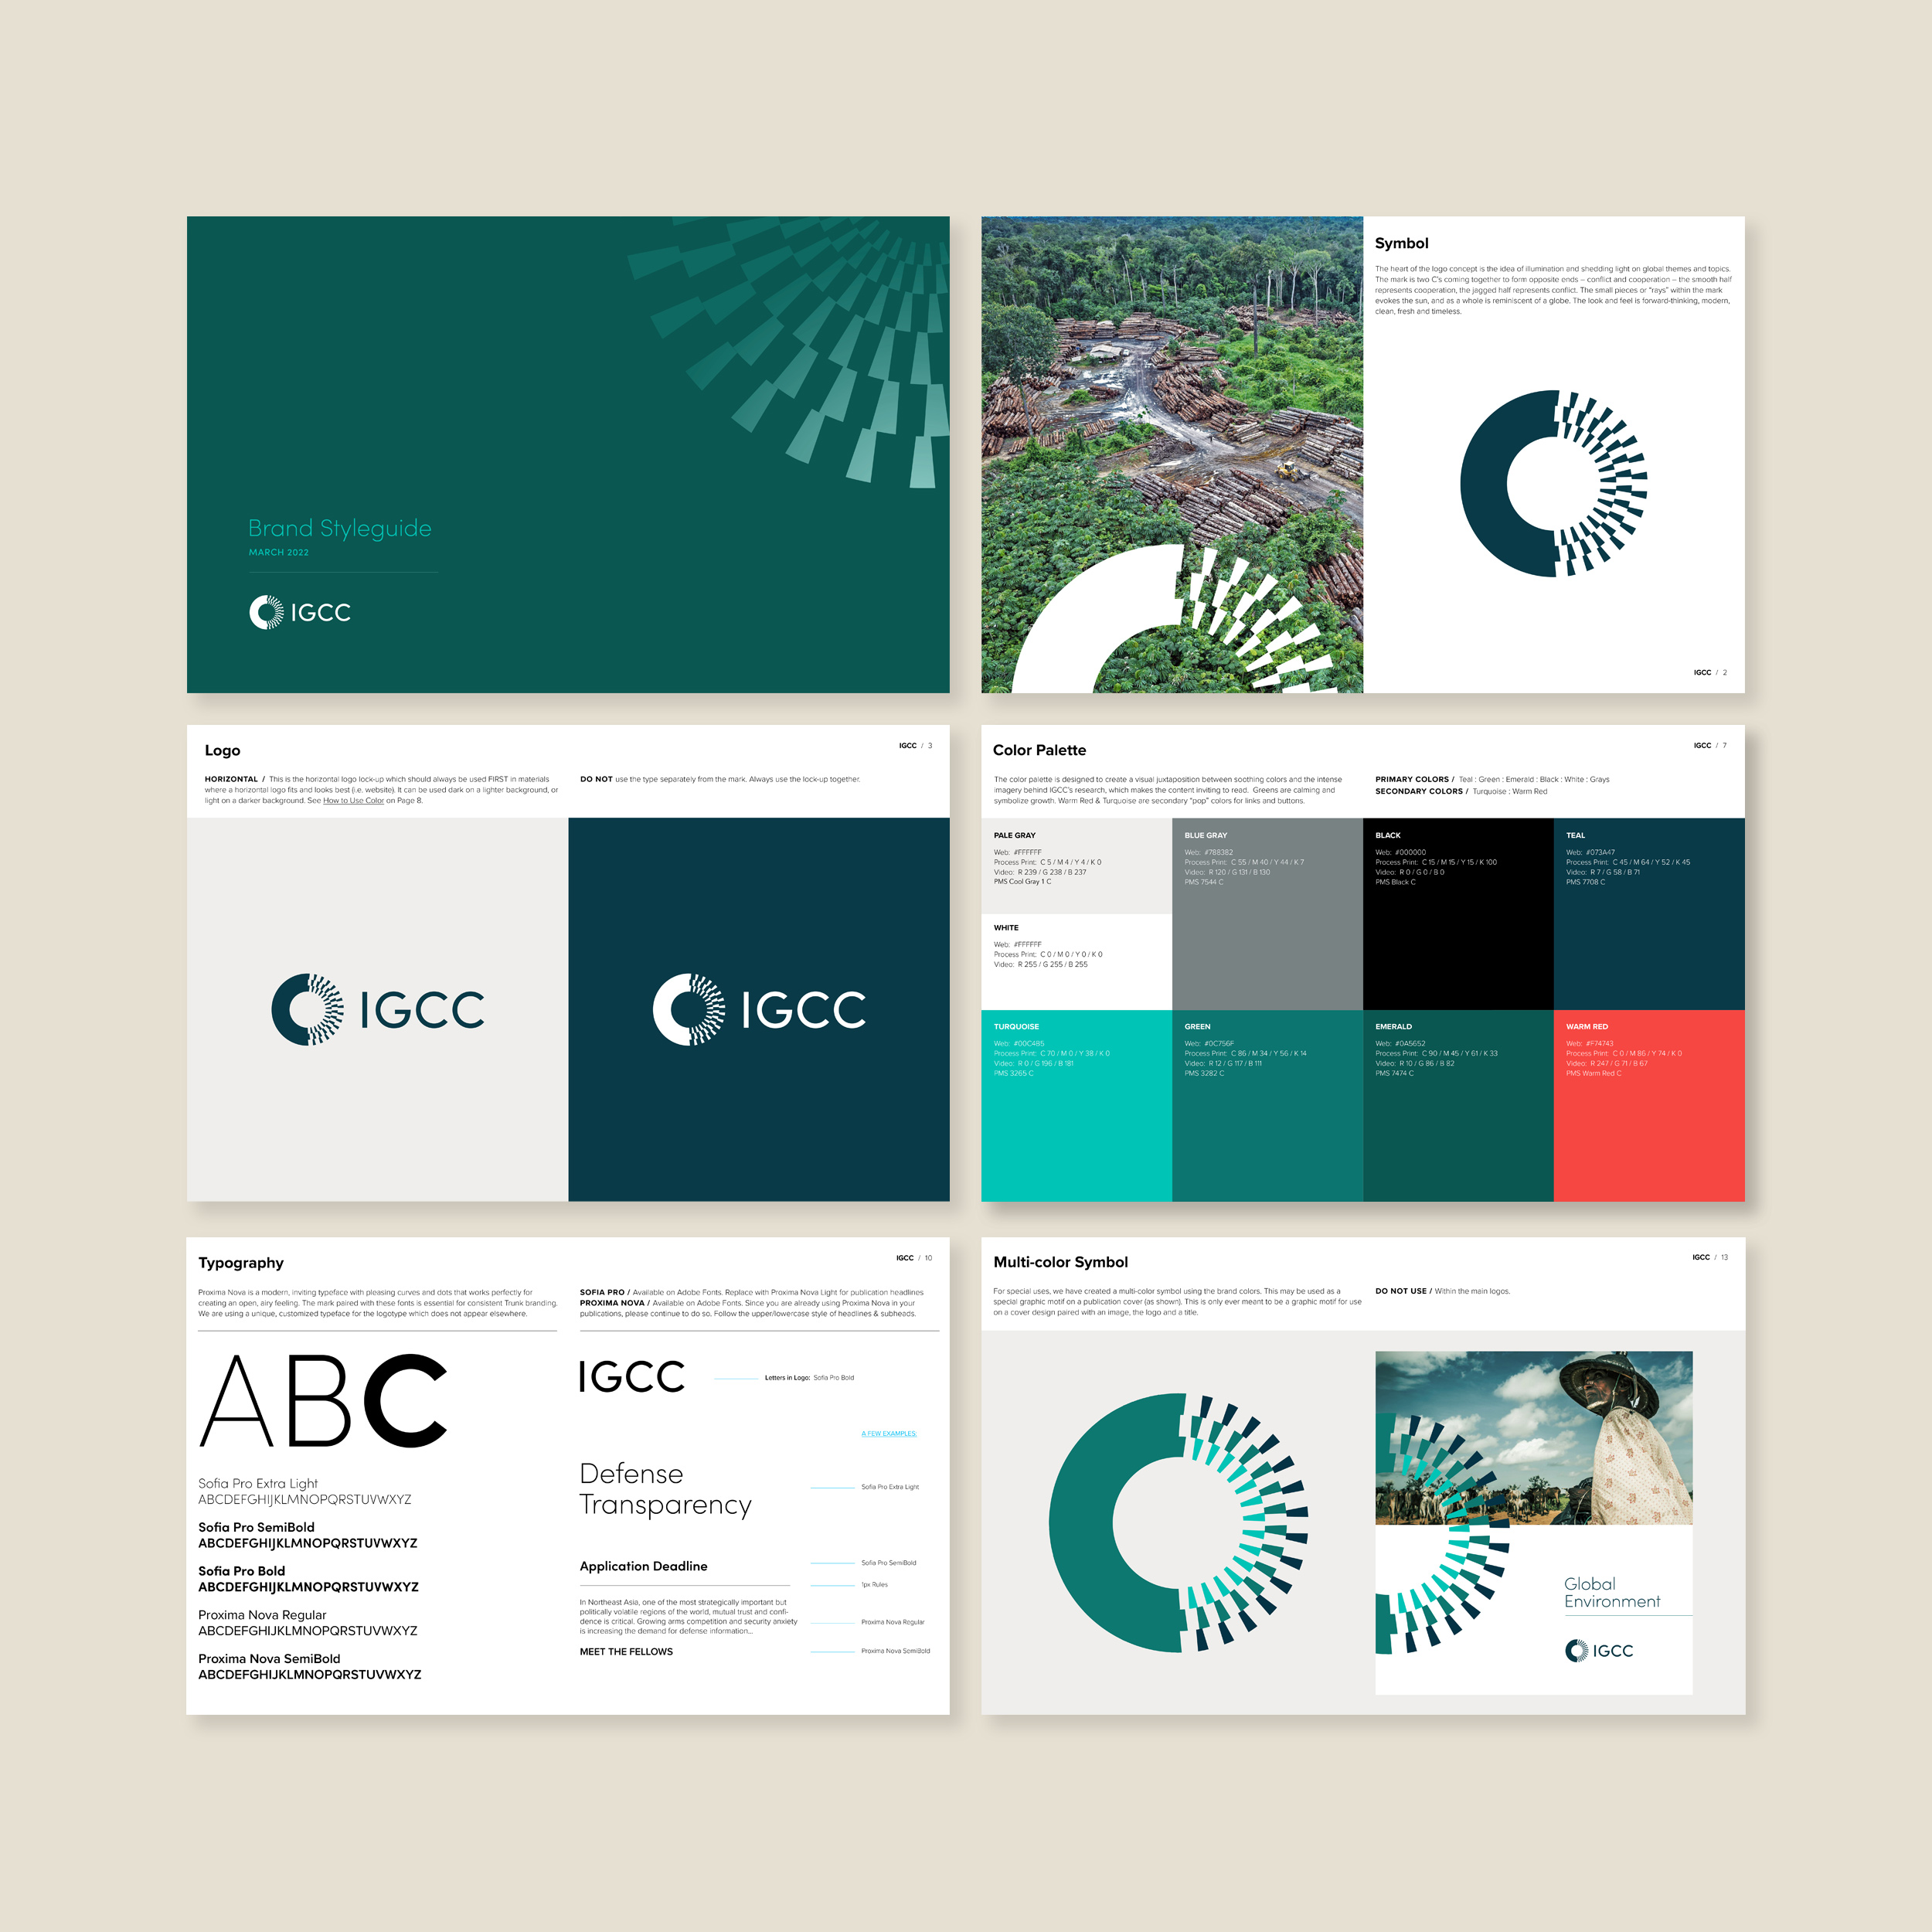 IGCC brand styleguide pages with rules for logo, colors, typography and motifs